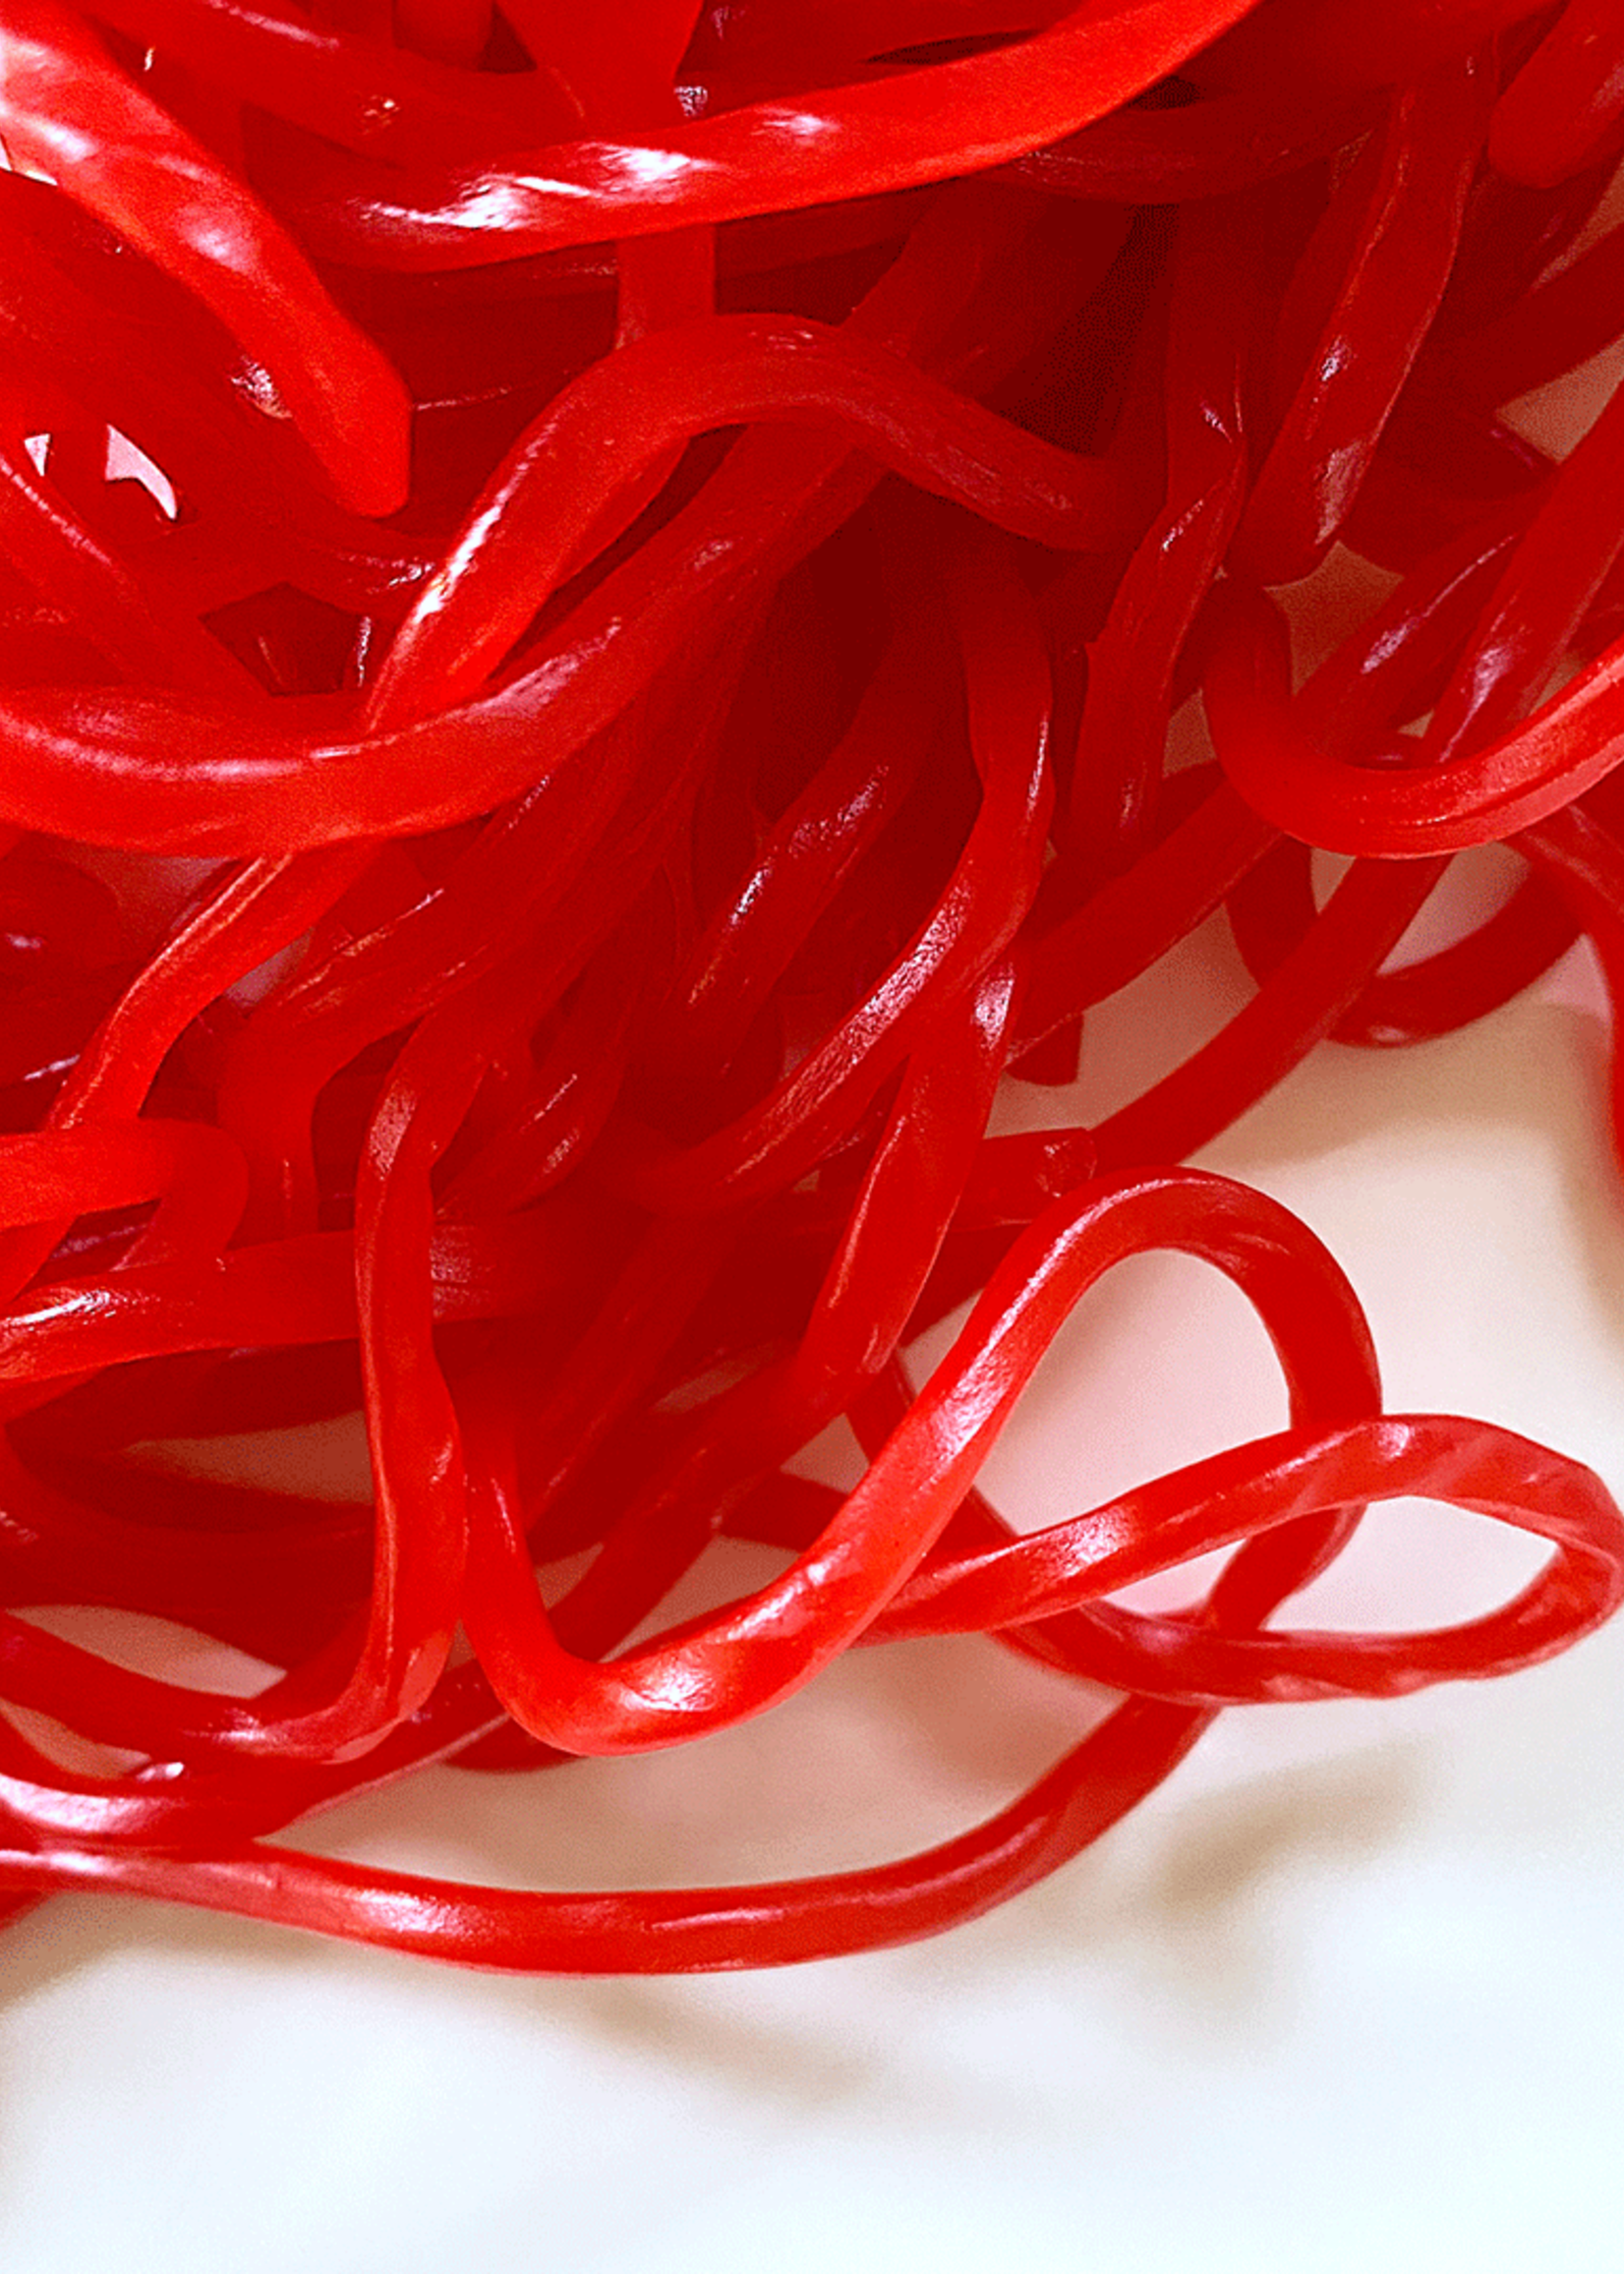 Candy Club Strawberry Laces